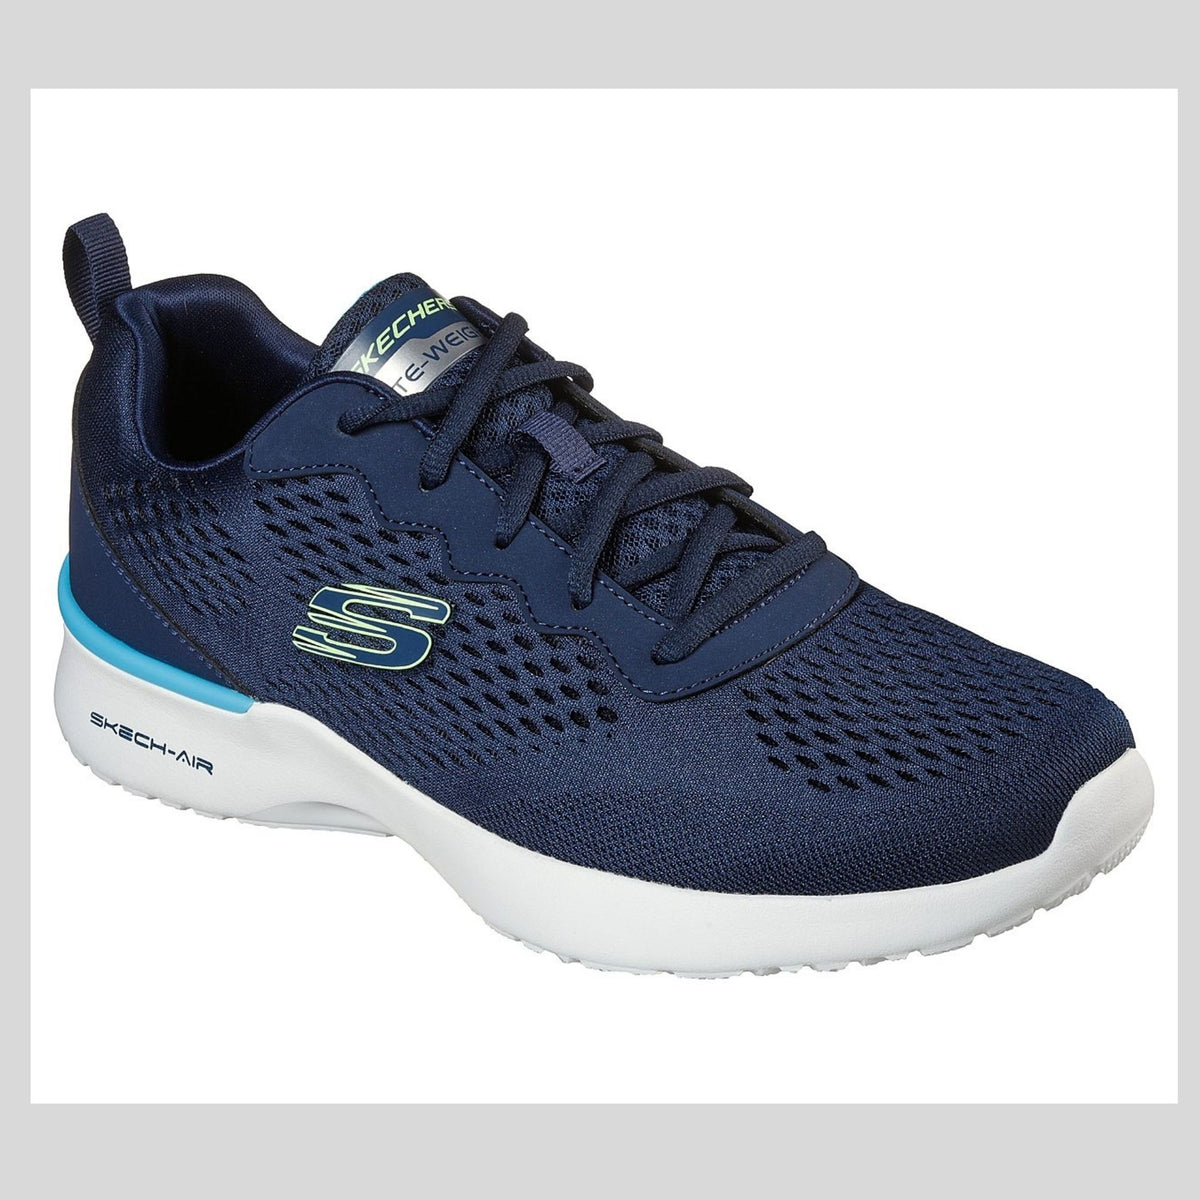 Skechers 232291 NVY - Skech-Air Dynamight